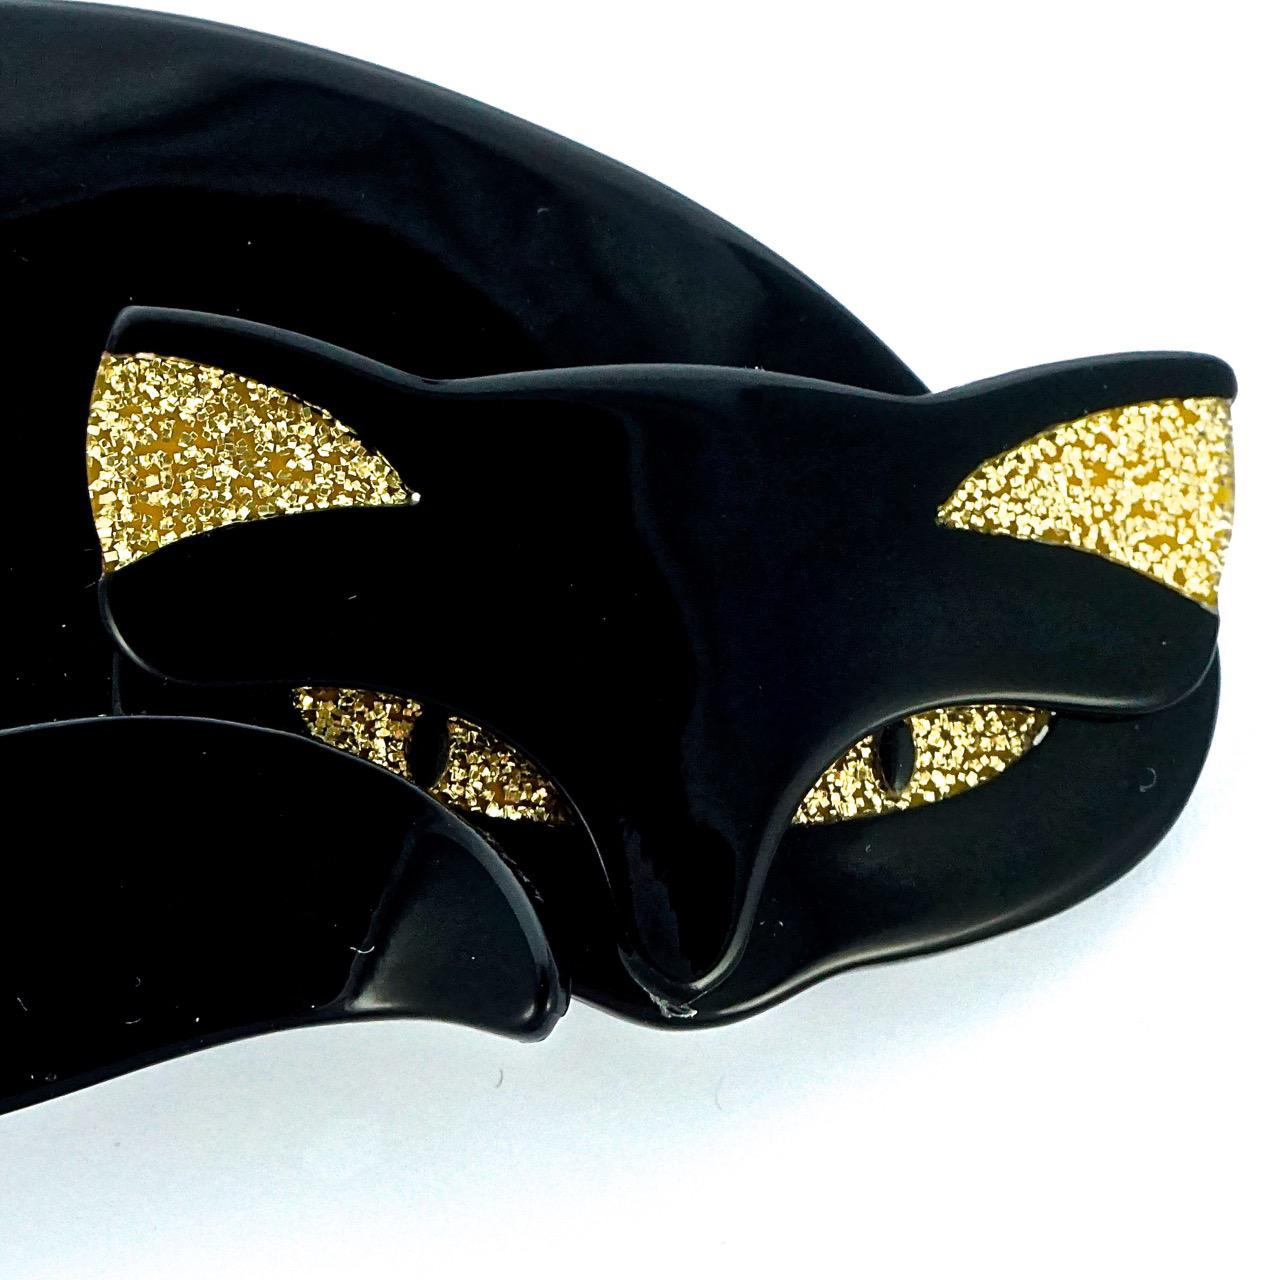 Lea Stein black Mistigri cat brooch, with gold sparkly eyes and ears. The brooch is made from layered plastic, and measures a maximum of 8.9cm / 3.5 inches by 5.05cm / 1.98 inches.

This is a beautiful collectable Lea Stein cat brooch in a wonderful